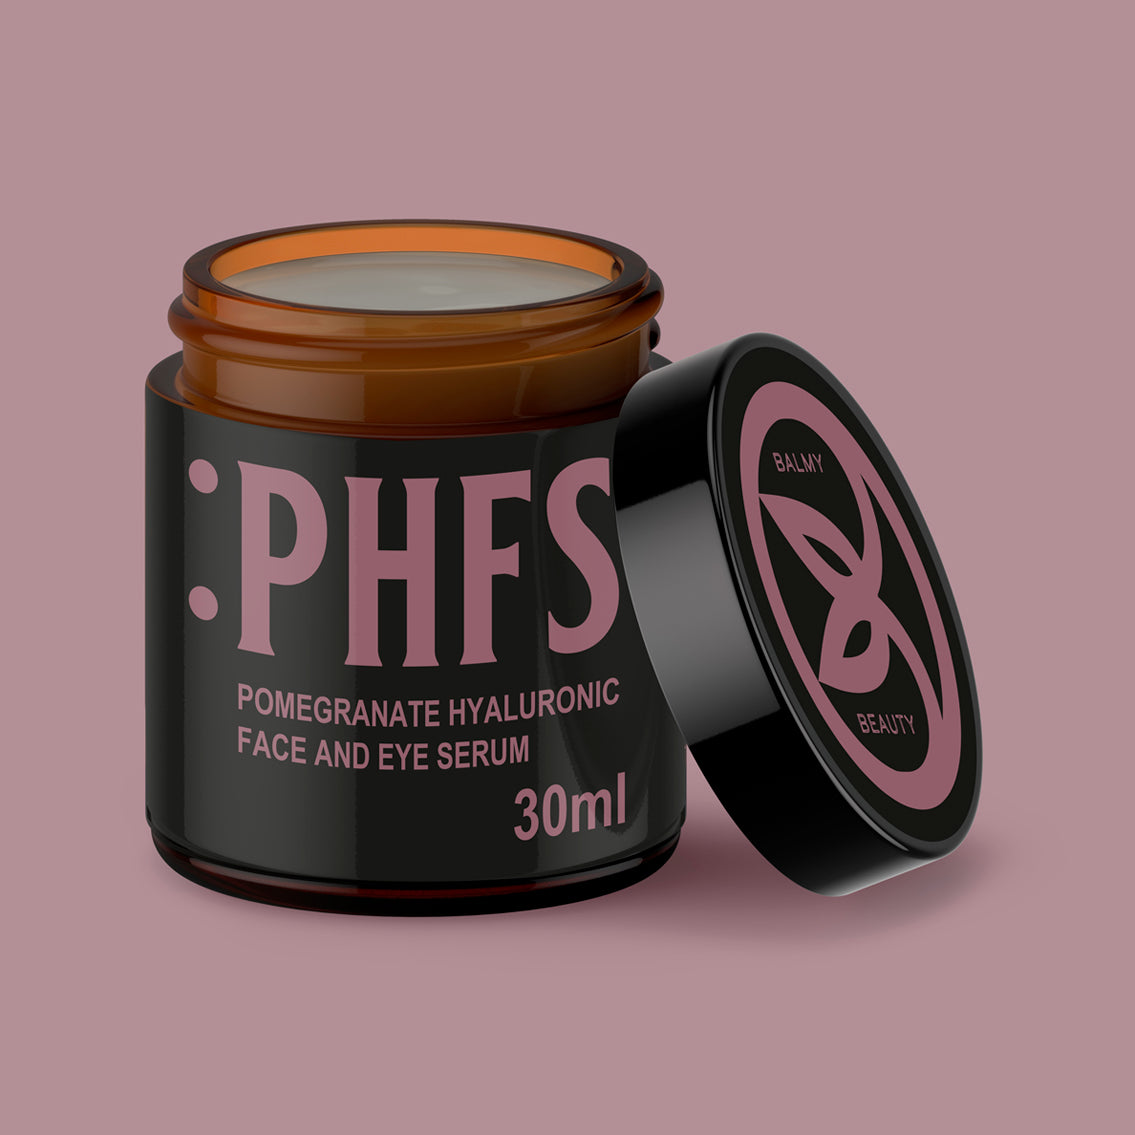 :PHFS Pomegranate and Hyaluronic Face & Eye Serum